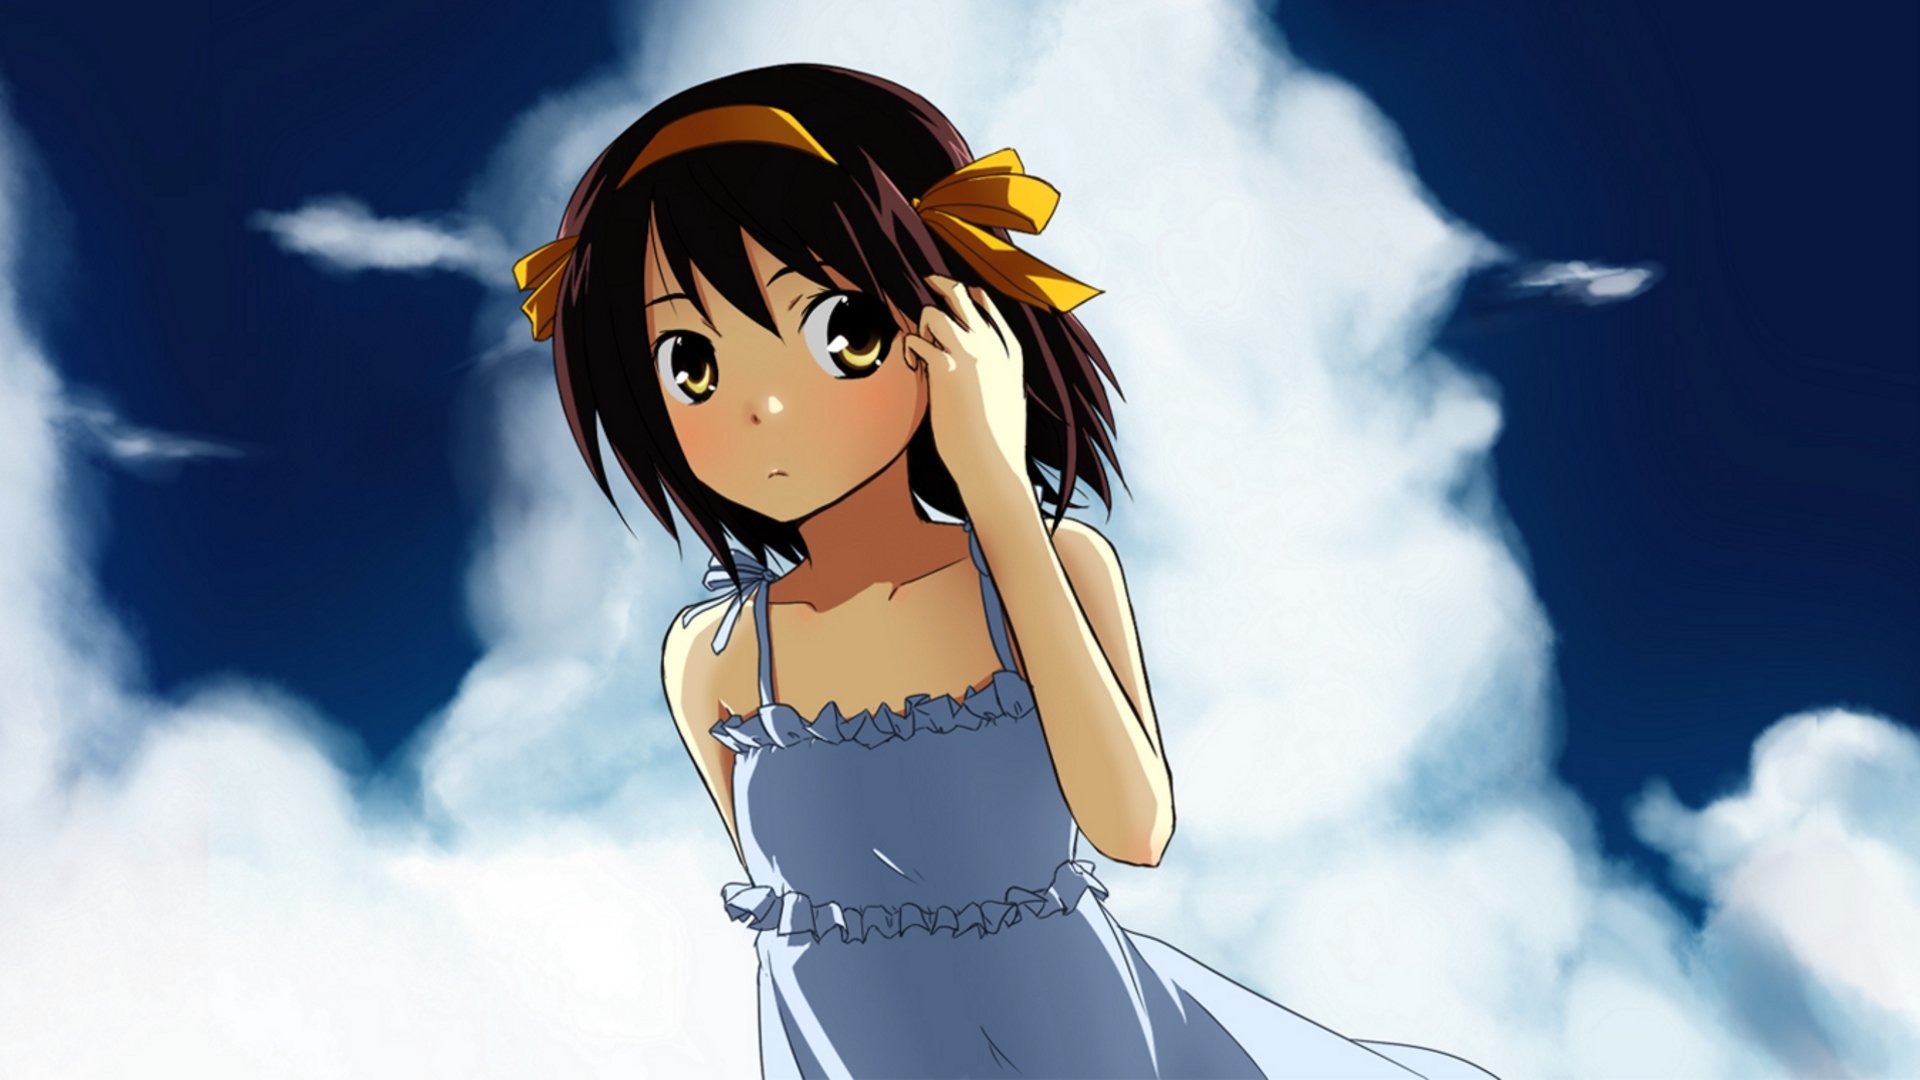 Awesome The Melancholy Of Haruhi Suzumiya free background ID:139391 for hd 1080p computer